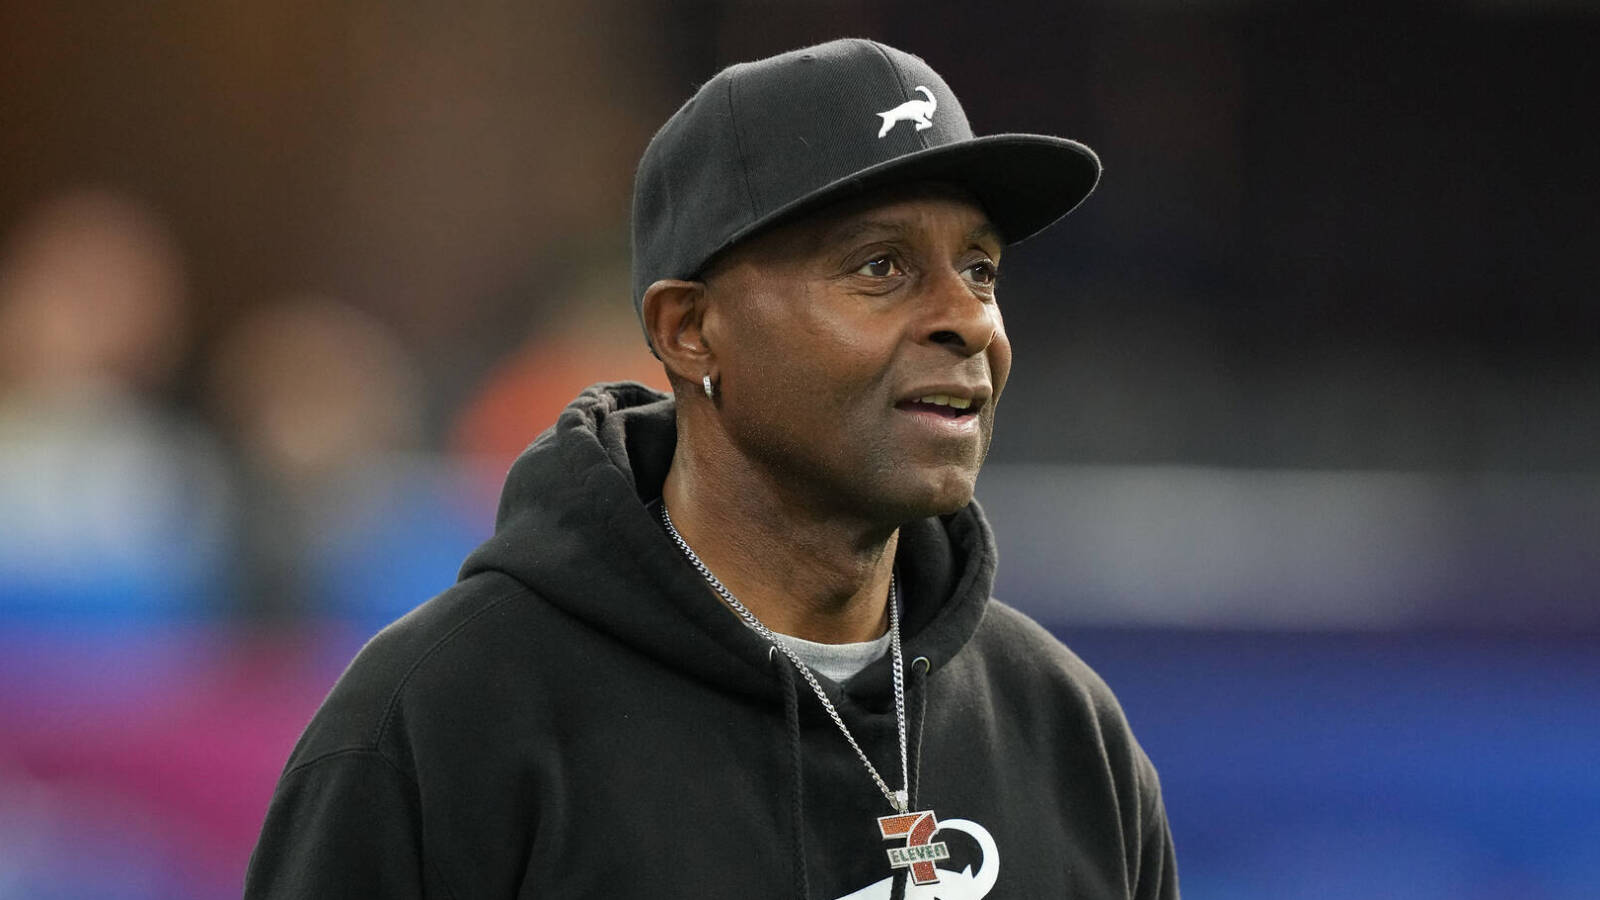 Jerry Rice picks which Hall of Fame QB he'd rather play with